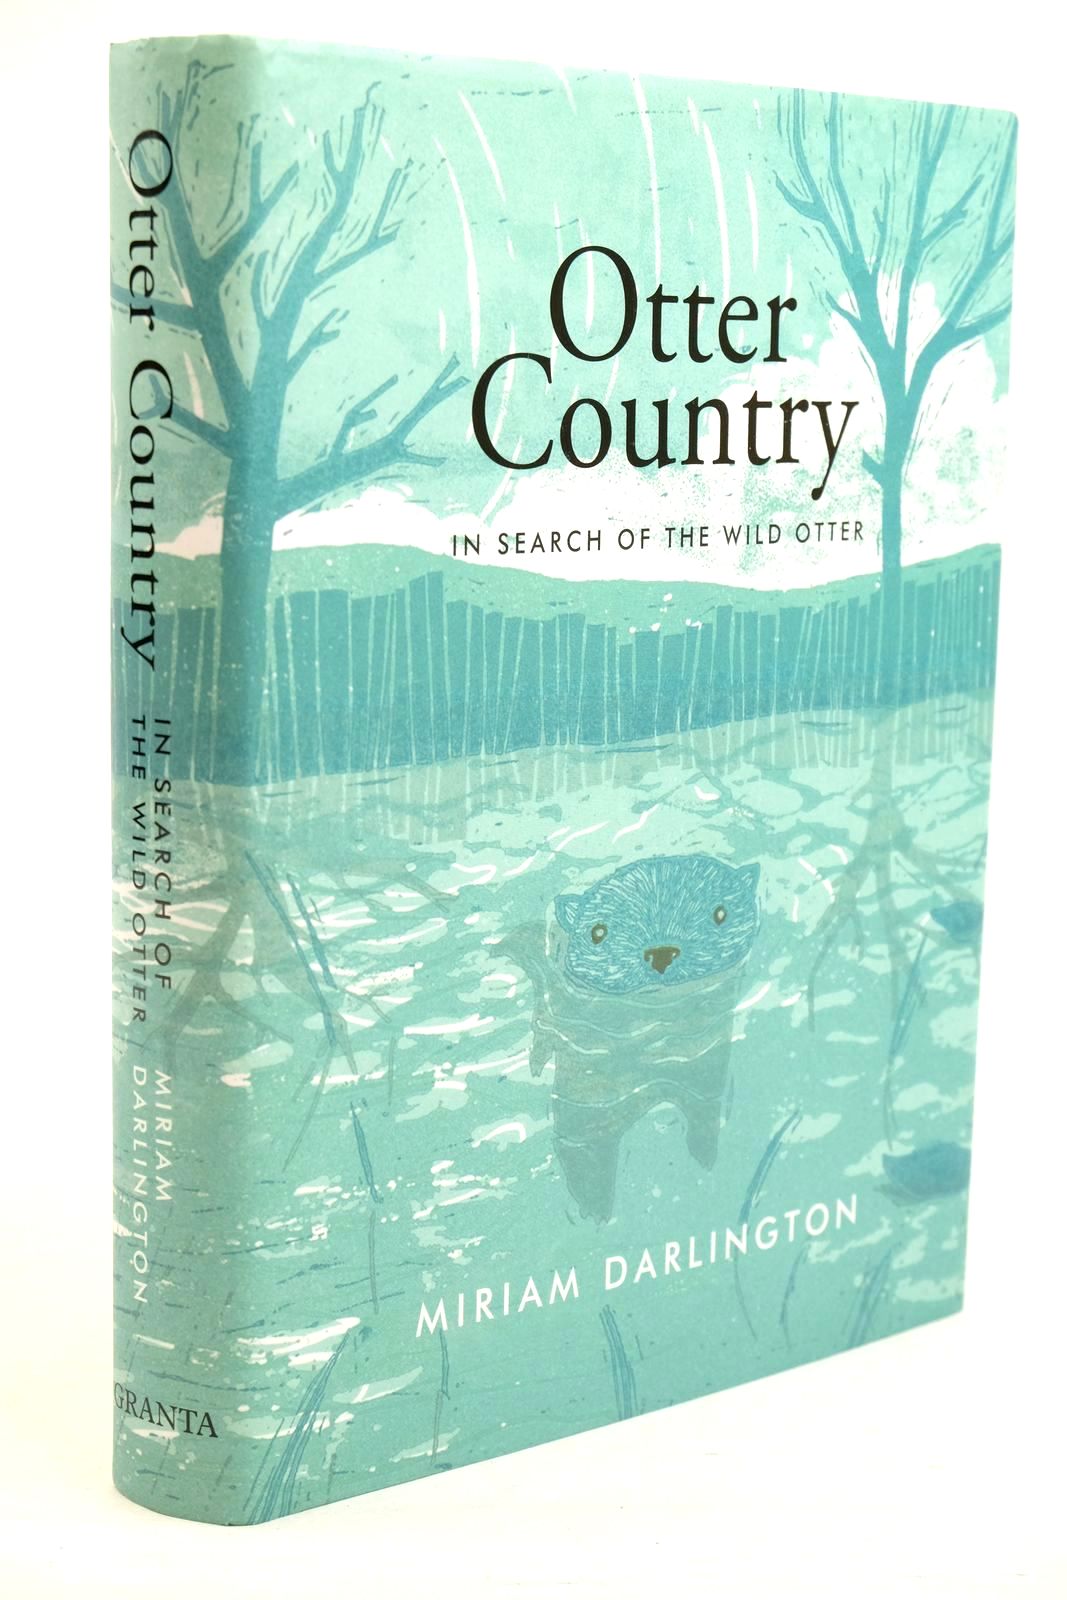 Photo of OTTER COUNTRY IN SEARCH OF THE WILD OTTER written by Darlington, Miriam illustrated by Dyson, Kelly published by Granta (STOCK CODE: 1320964)  for sale by Stella & Rose's Books